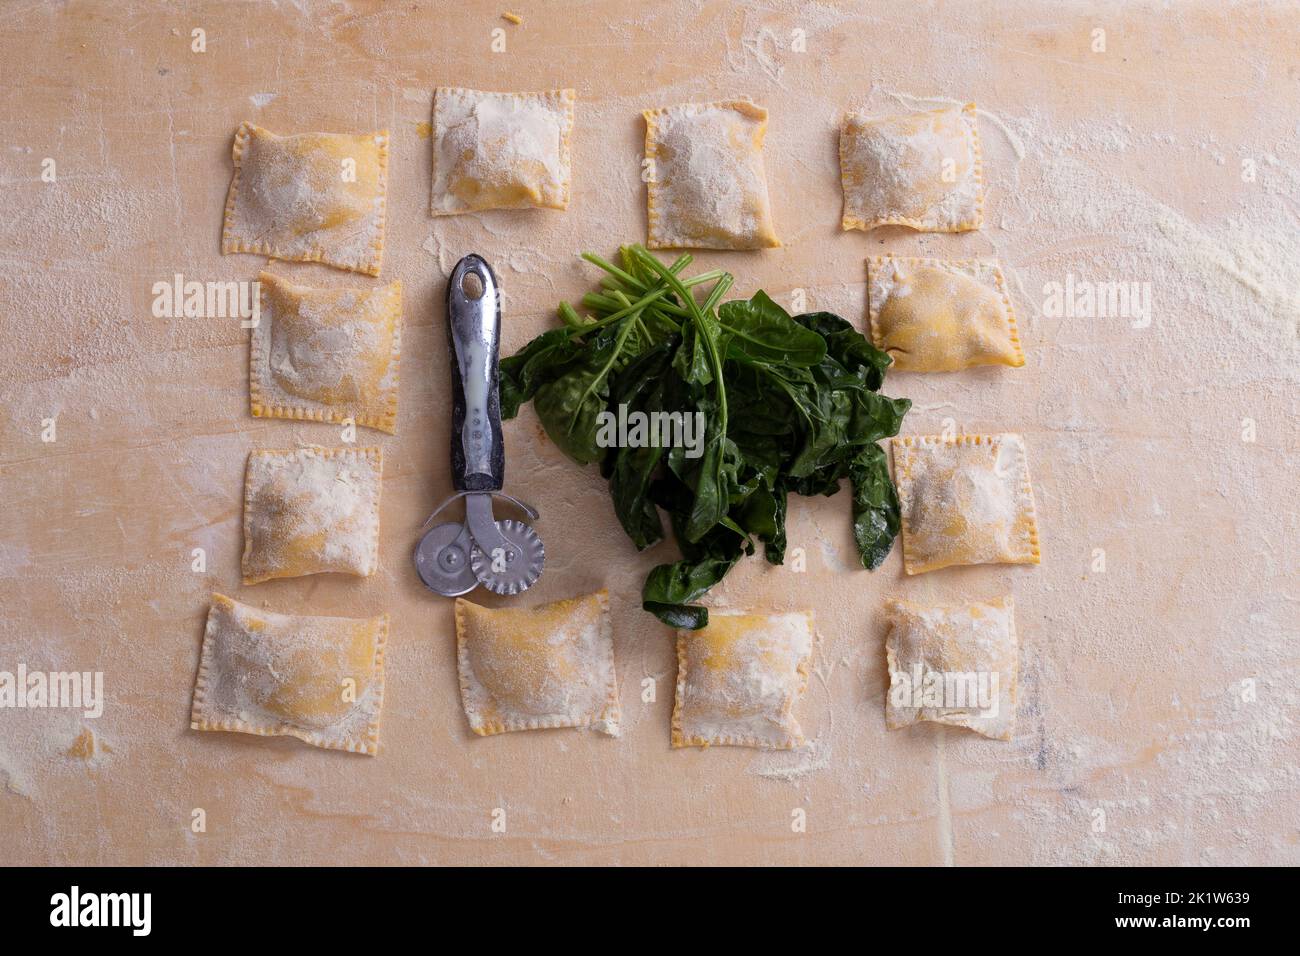 Italian ravioli photography Page - and Alamy pasta stock 13 hi-res images 